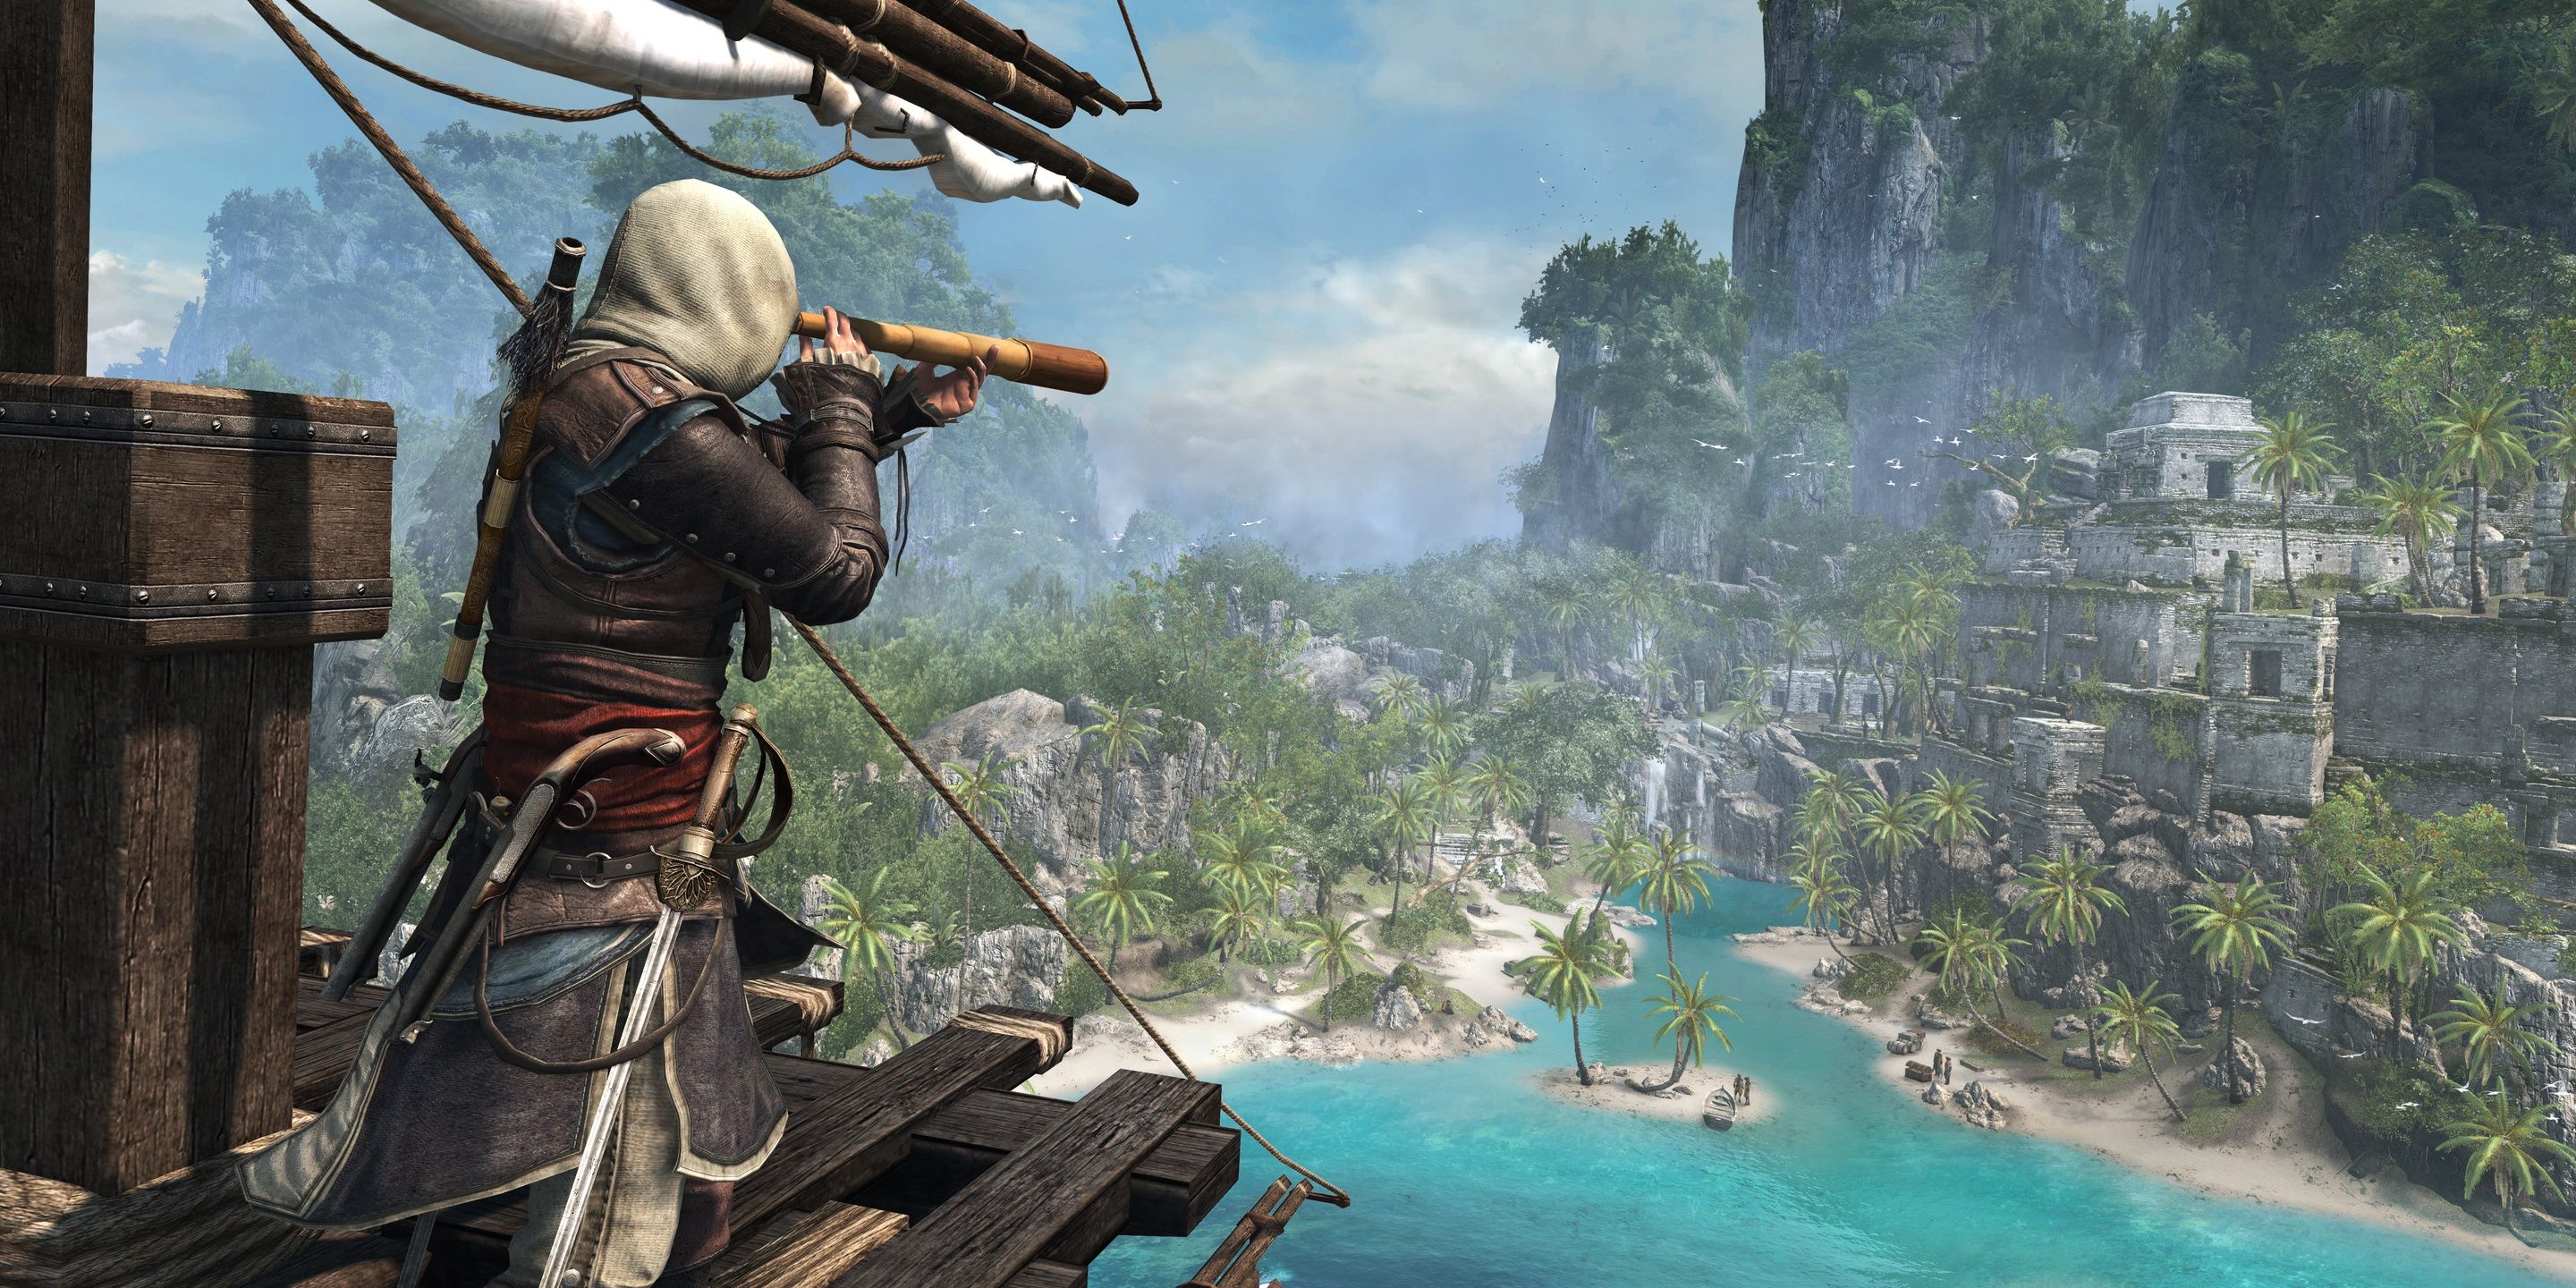 Edward Kenway looks into the mirror at the island from his ship at sea in Assassin's Creed IV Black Flag.